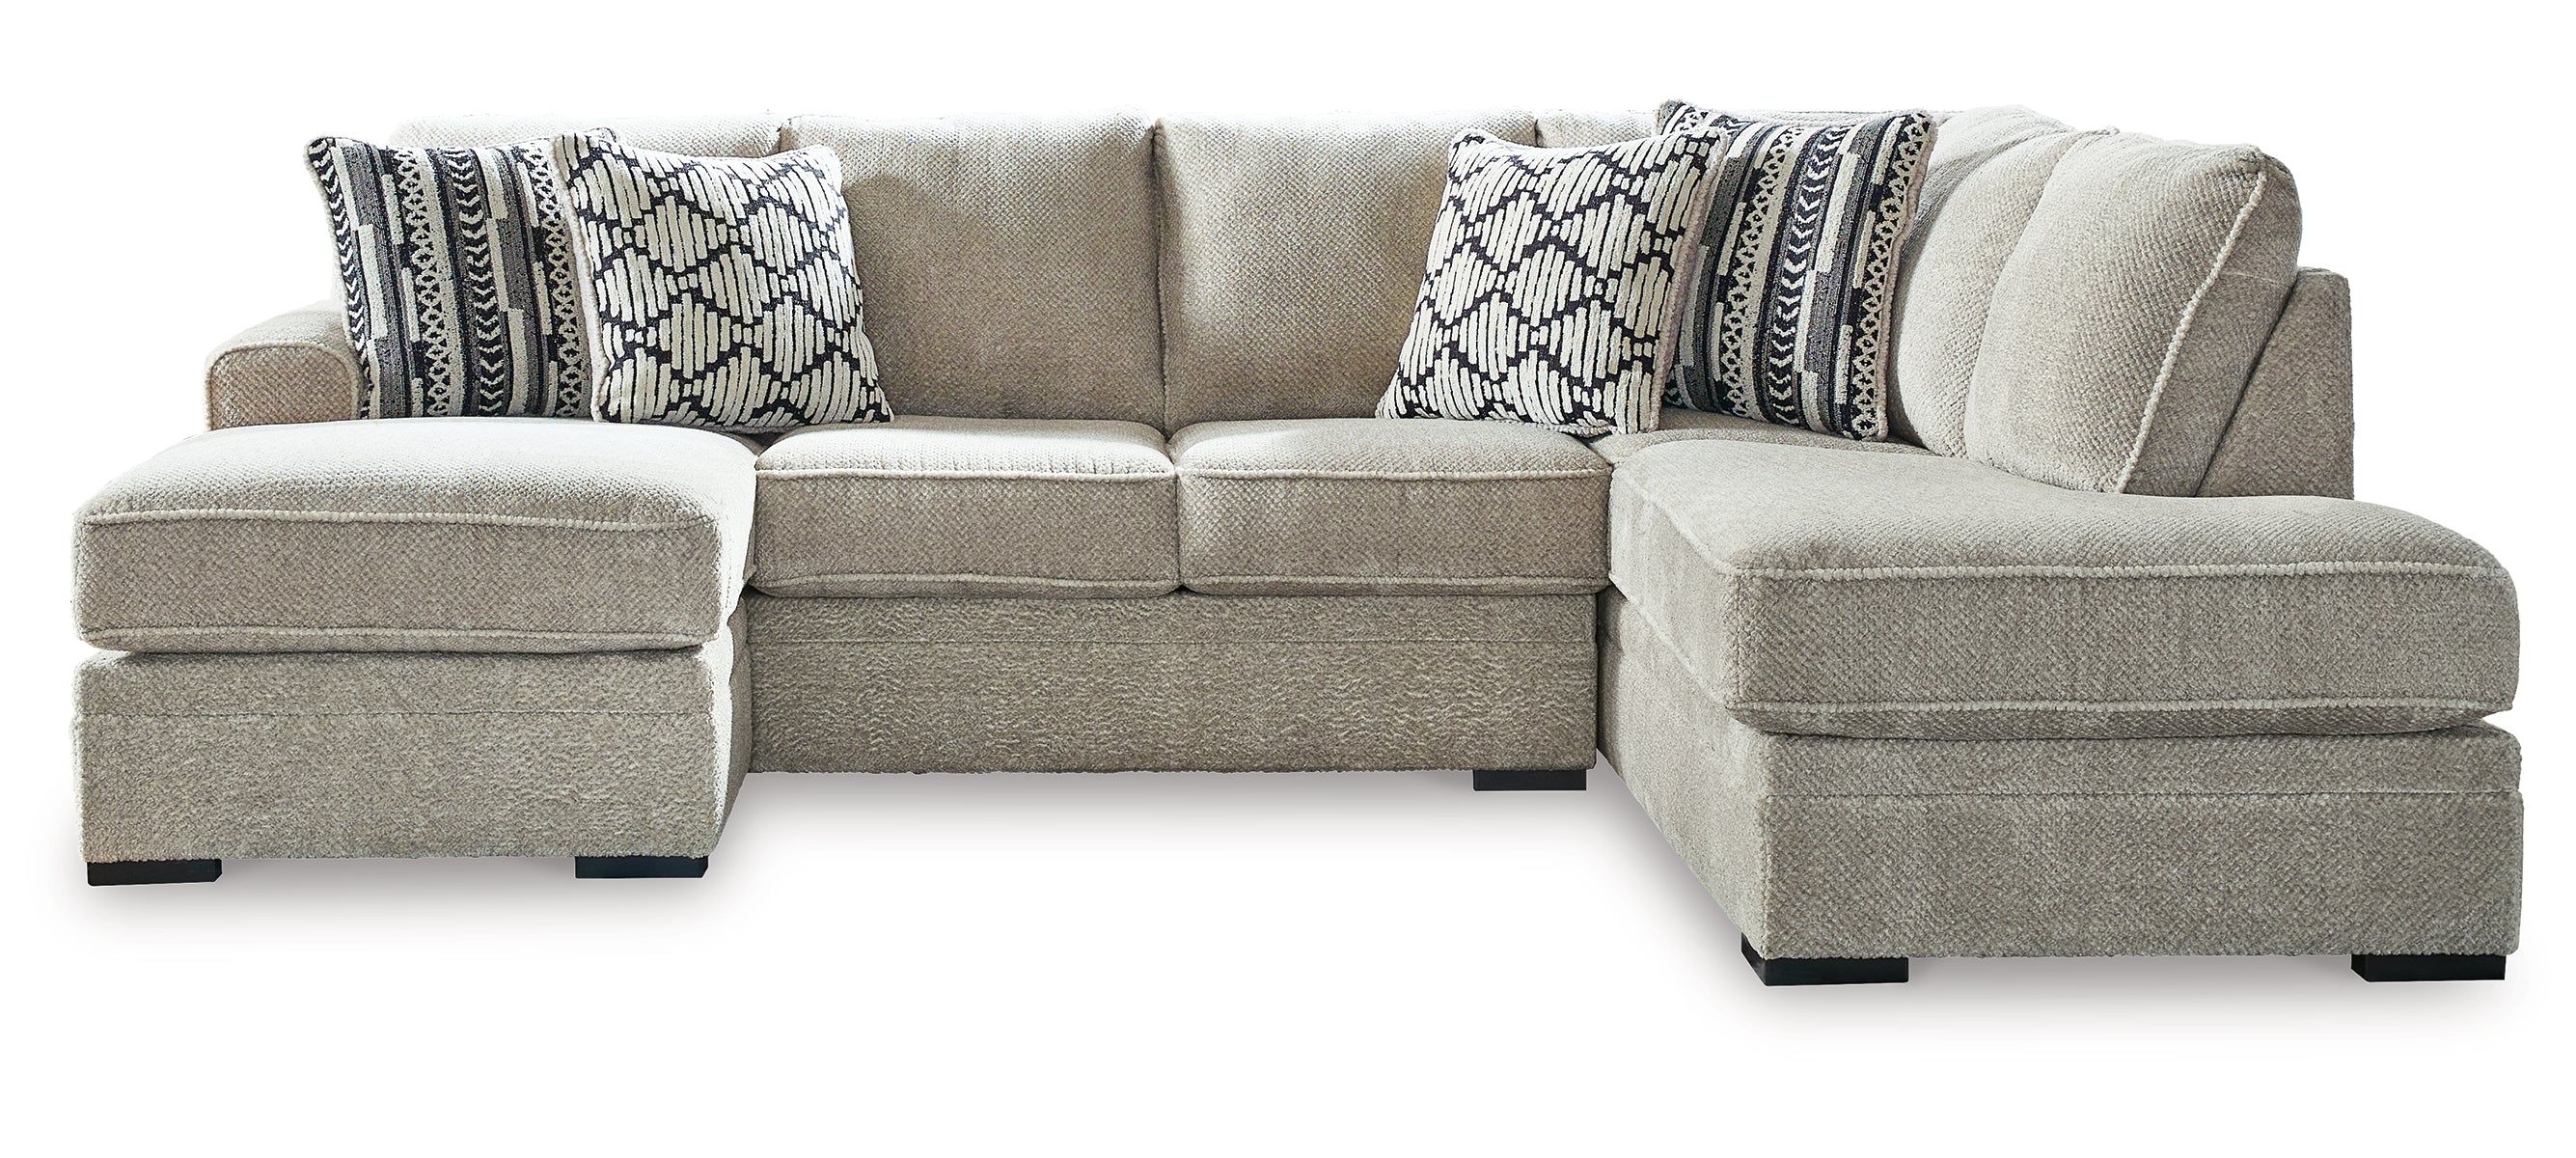 Calnita 2-Piece Sectional with Ottoman